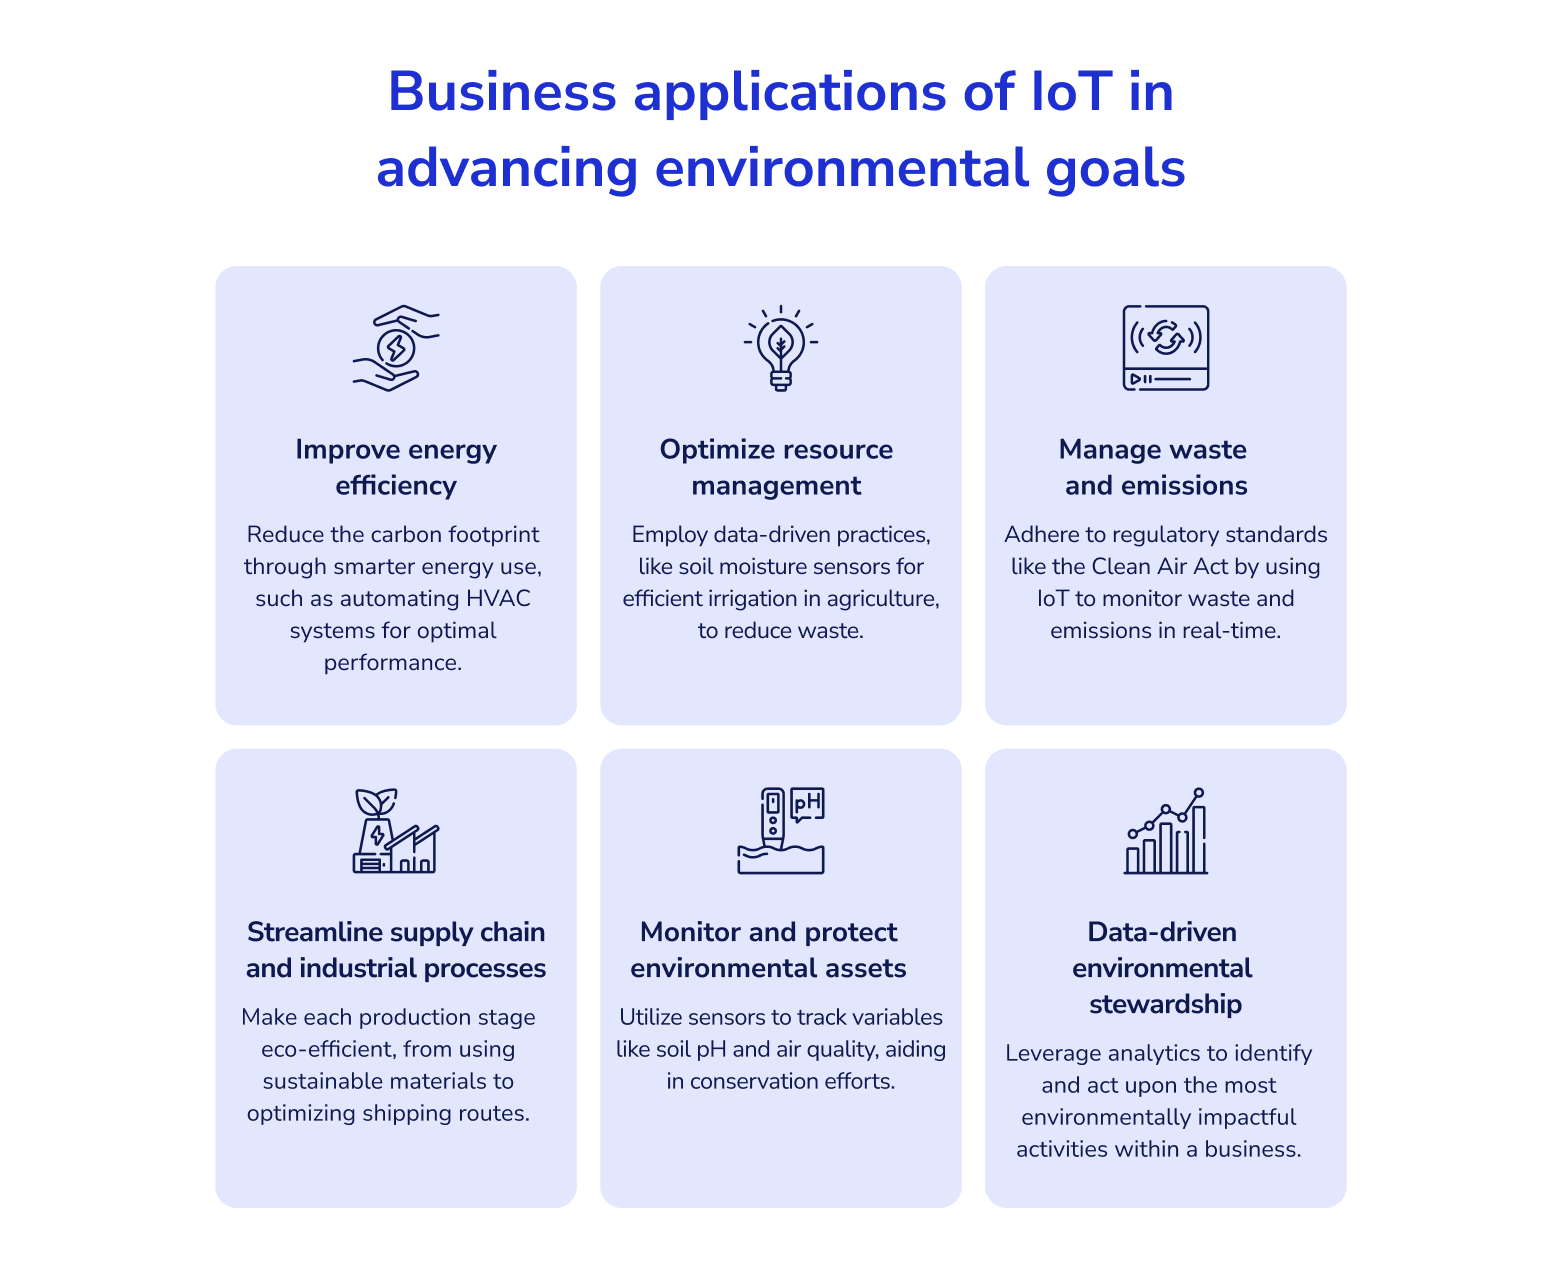 Business Applications of IoT in Advancing Environmental Goals